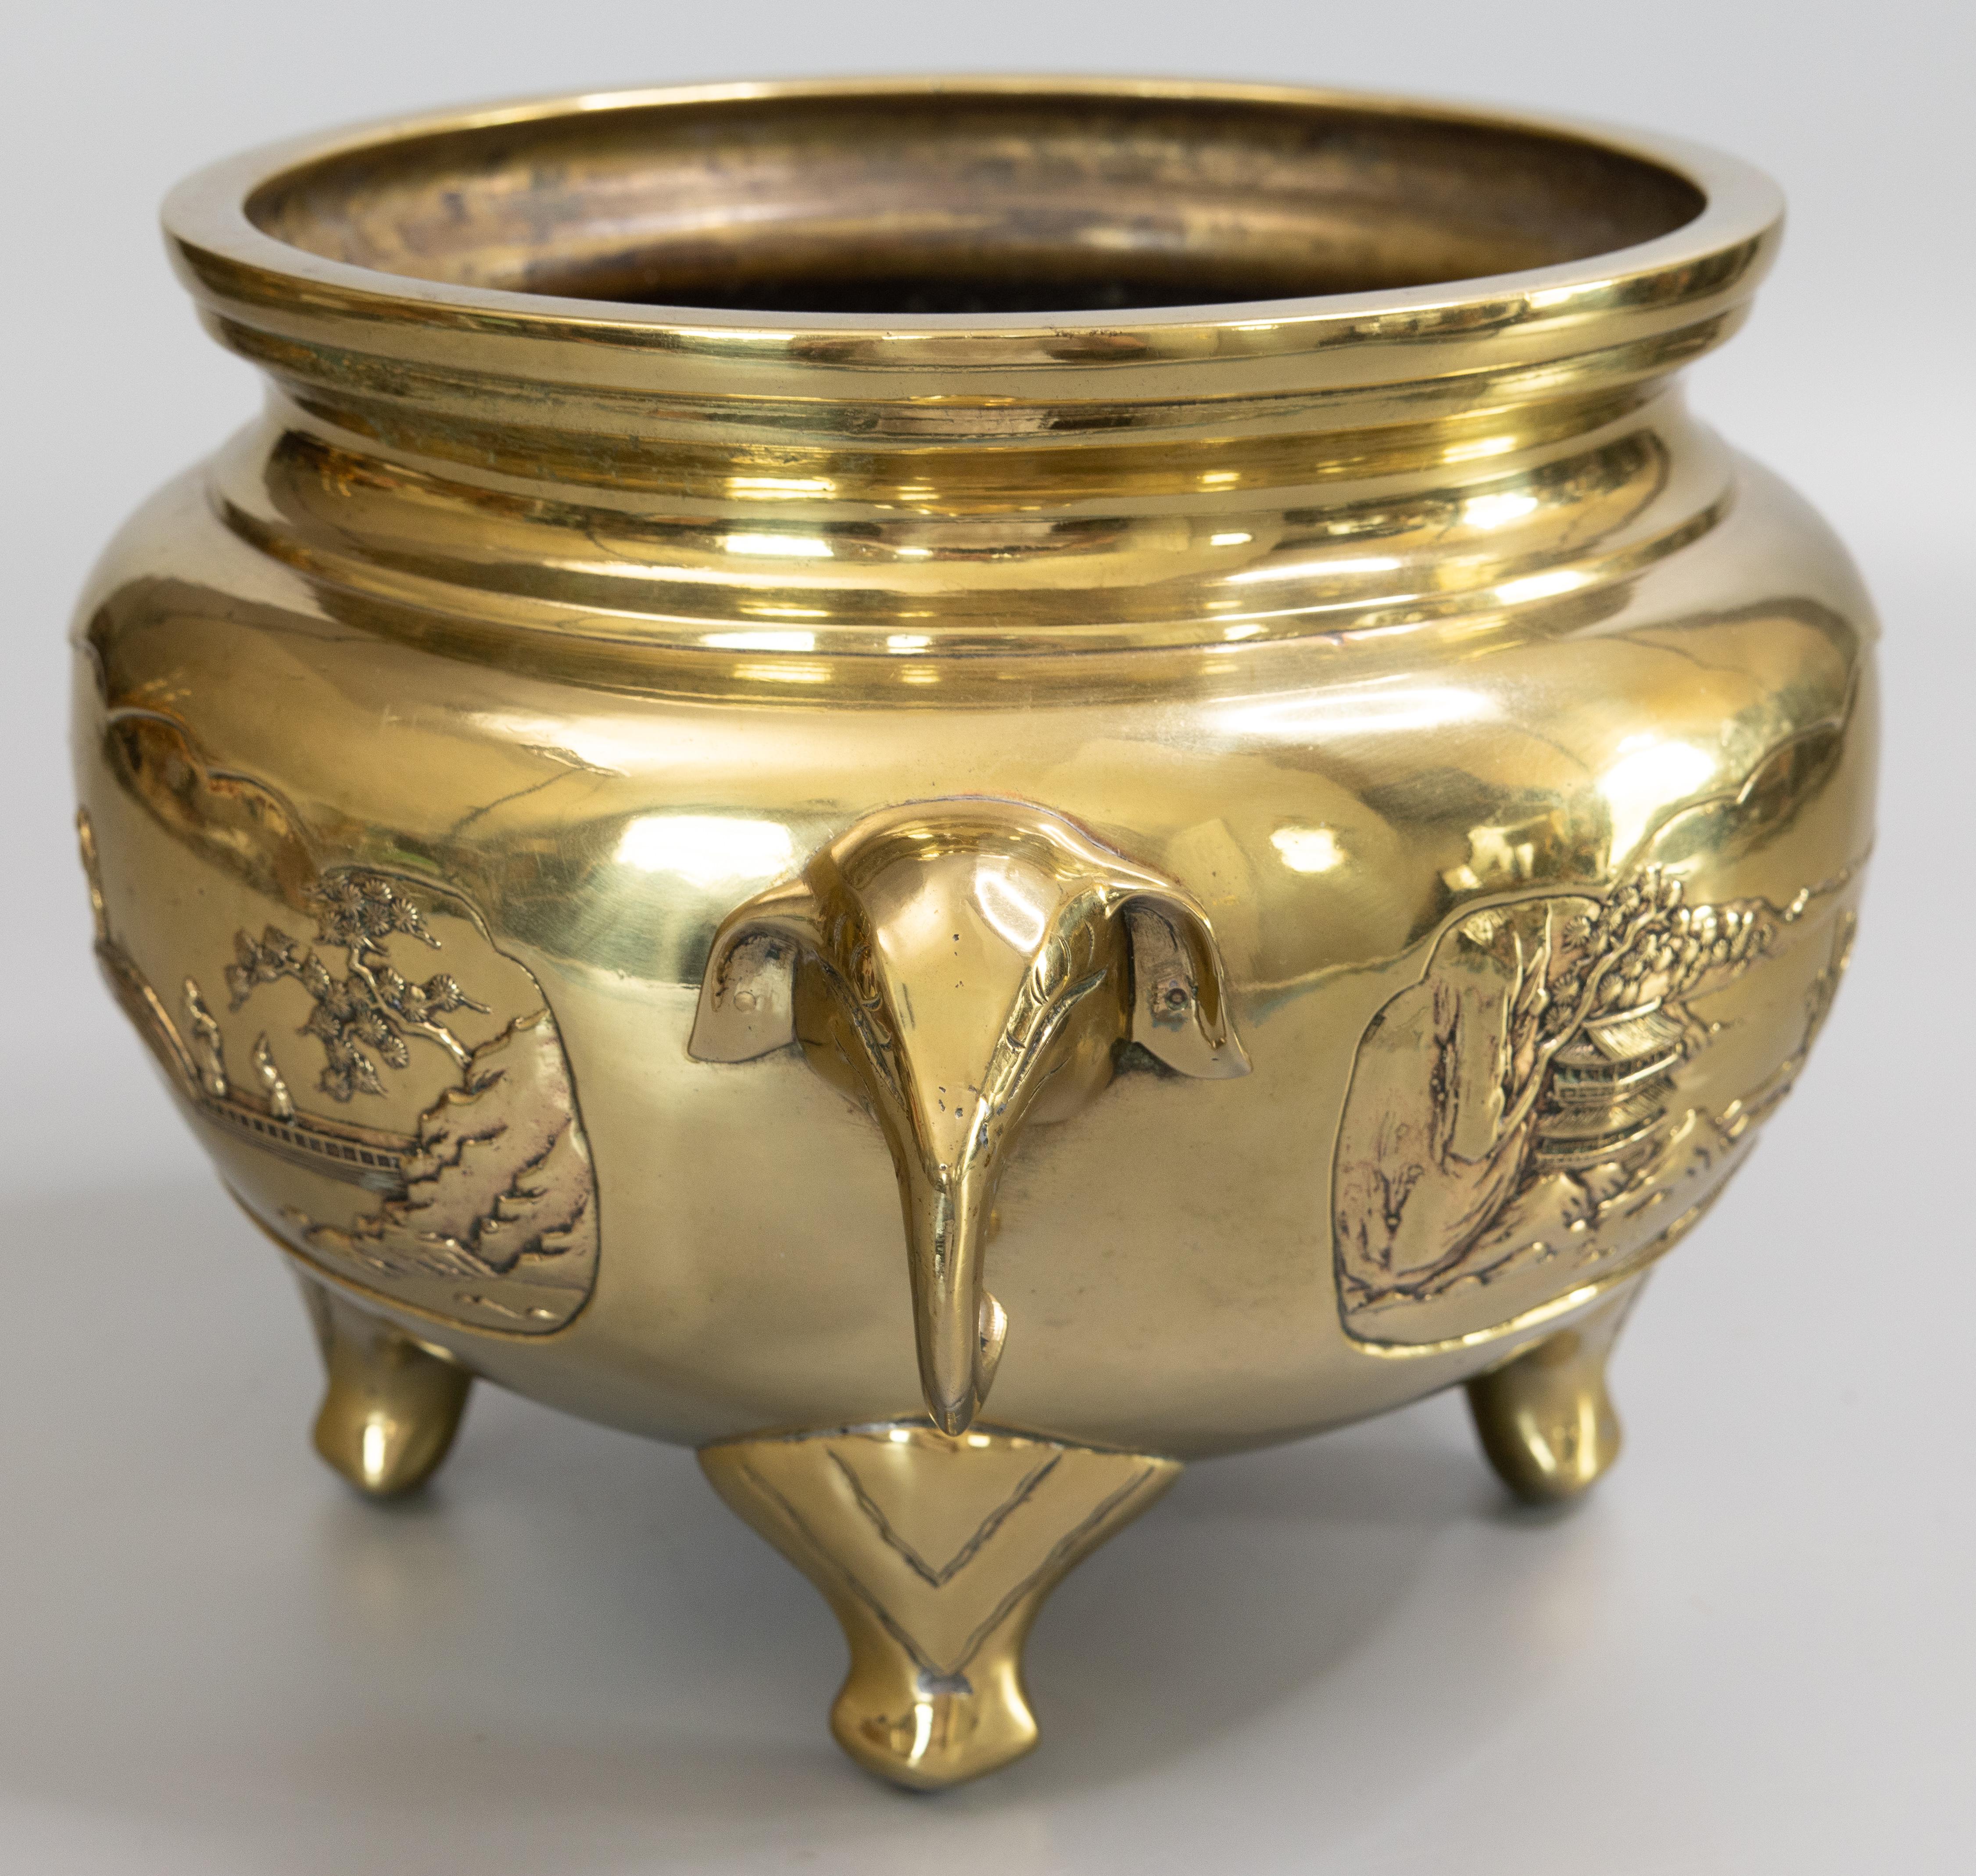 19th Century Japanese Brass Footed Planter Jardiniere In Good Condition For Sale In Pearland, TX